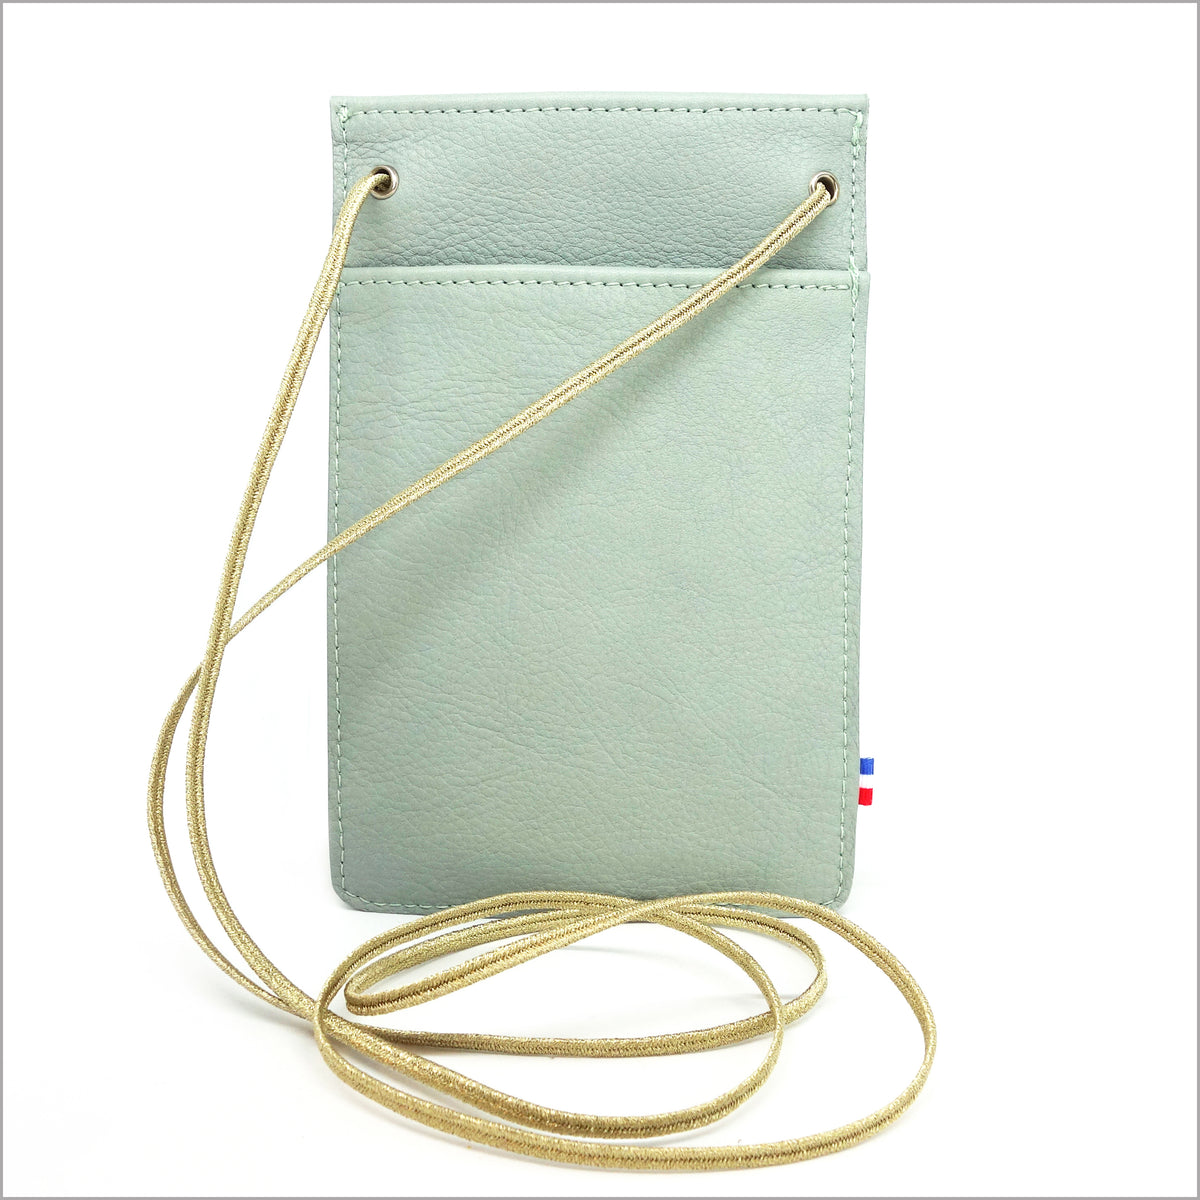 Phone pouch in almond green leather with adjustable shoulder strap